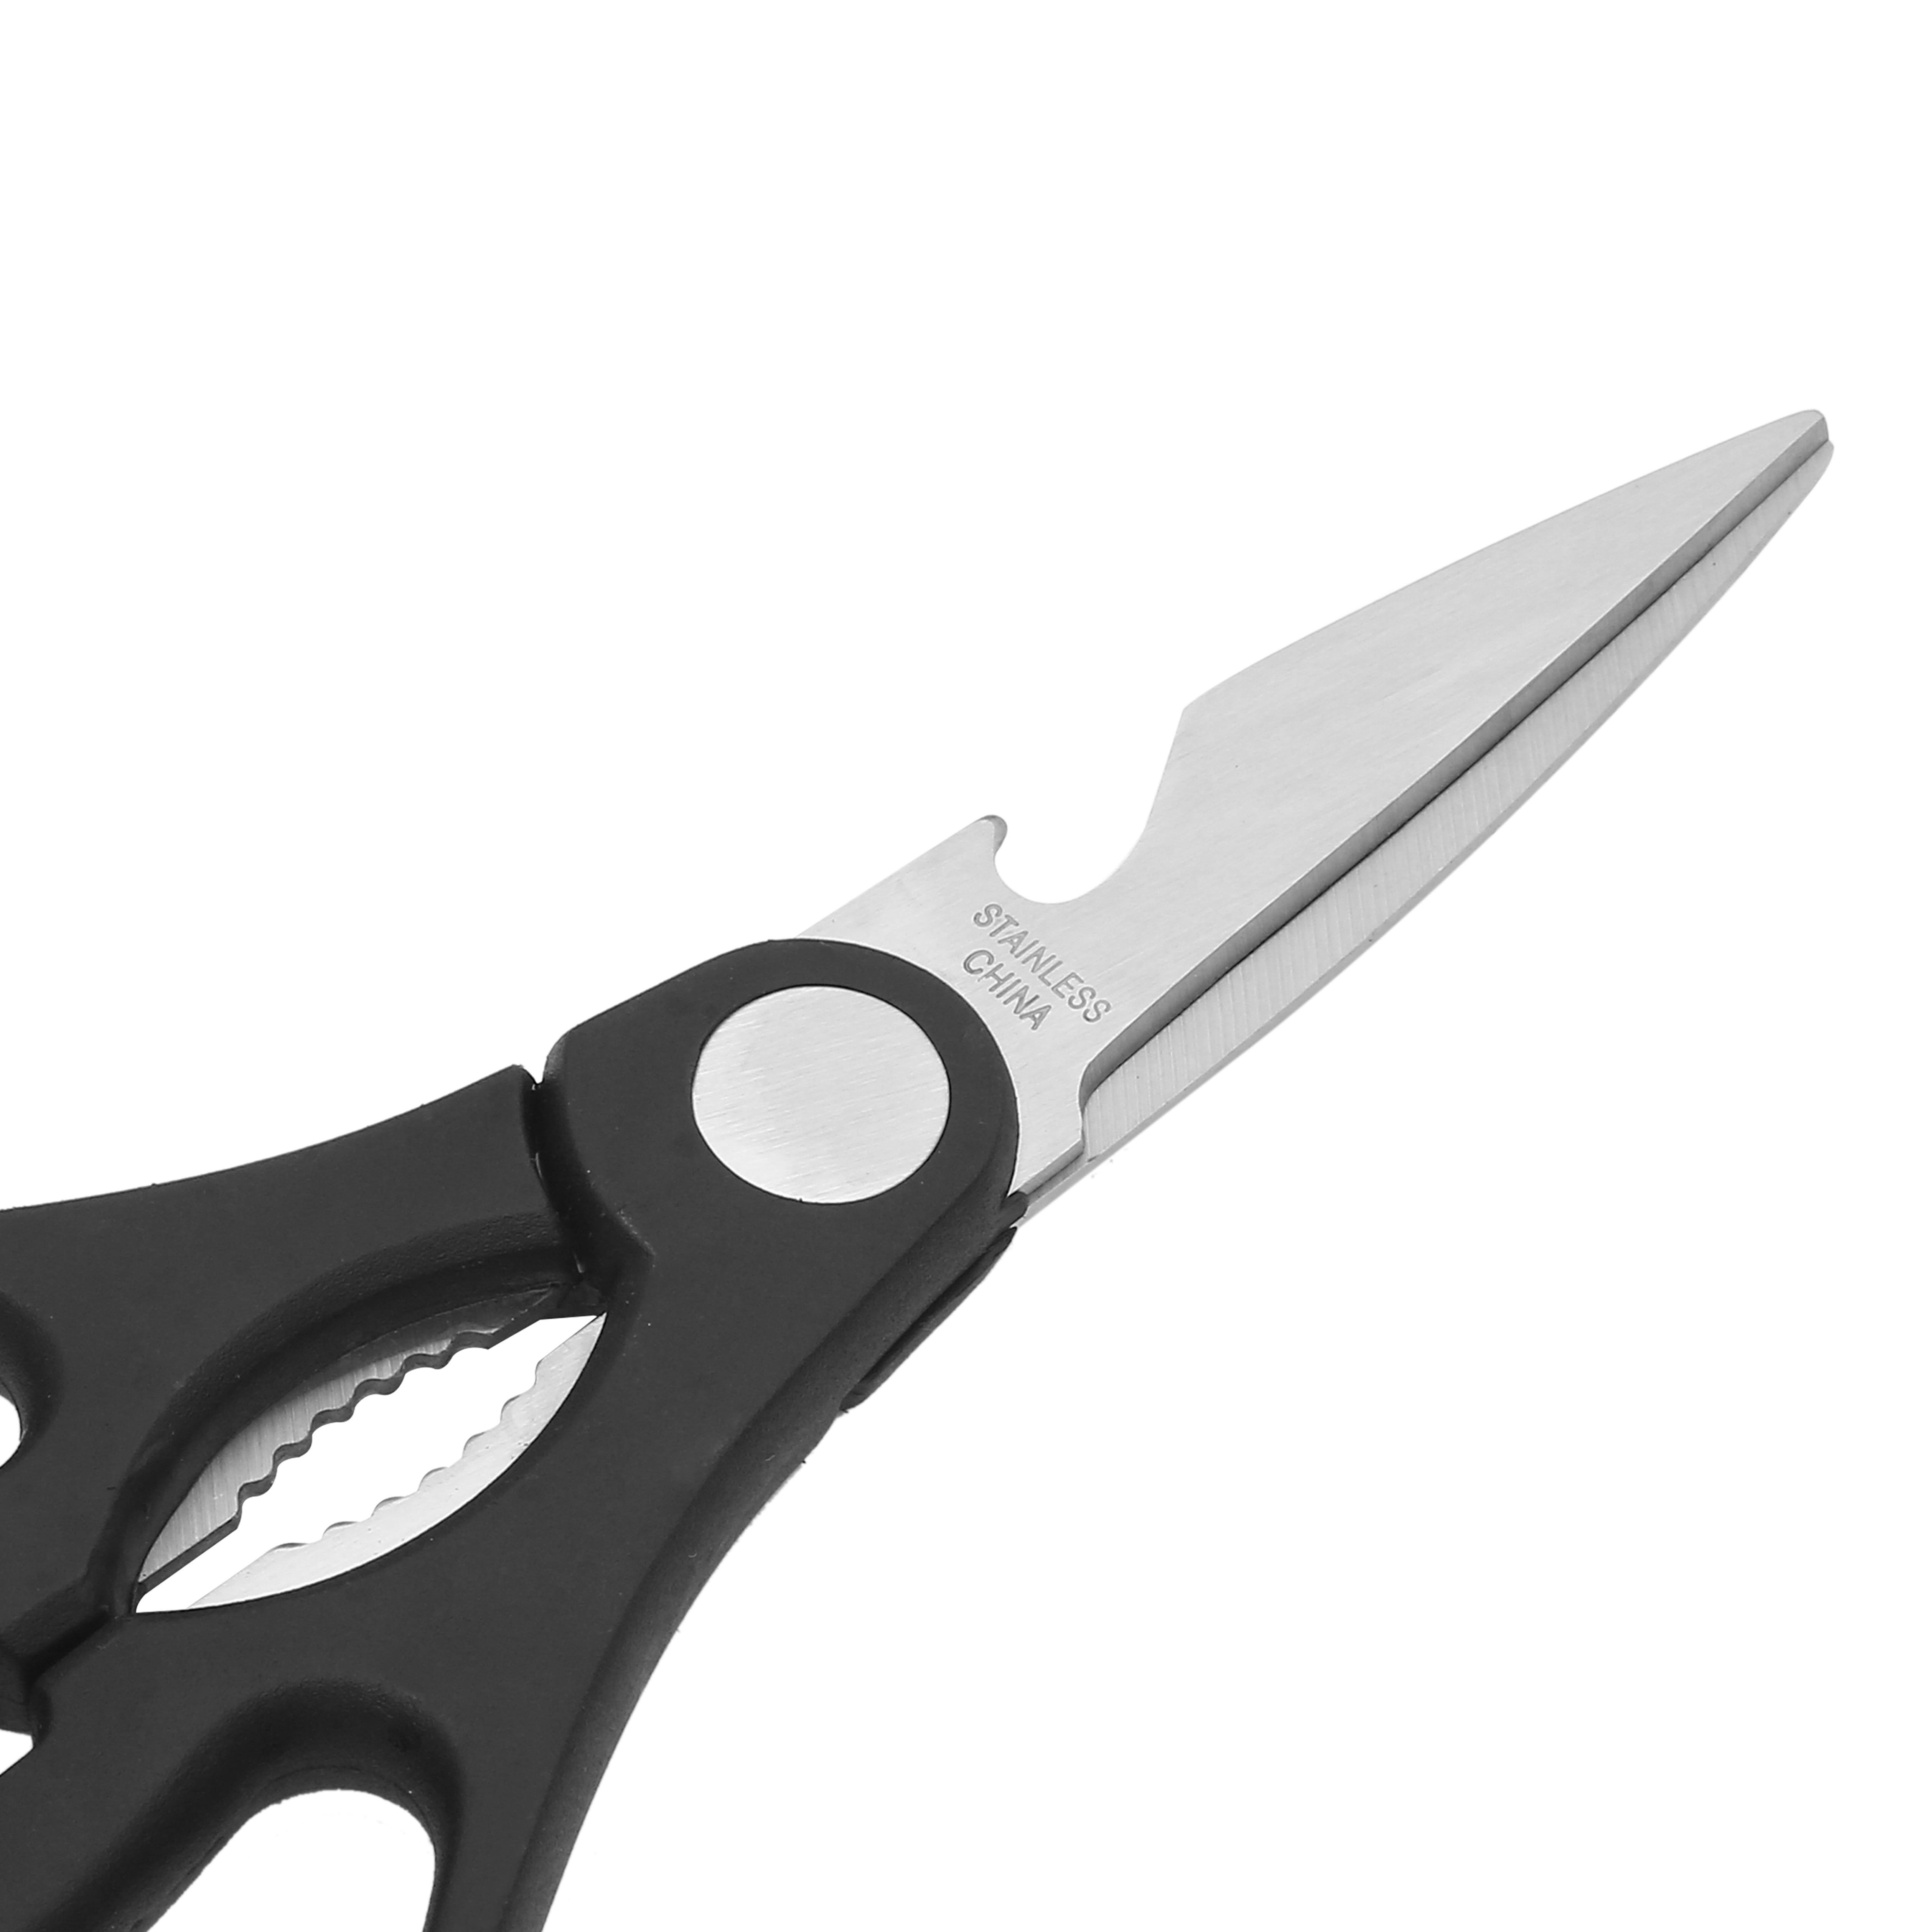 Utility Scissors with Magnetic Holder - Item #ZIP1585 -   Custom Printed Promotional Products